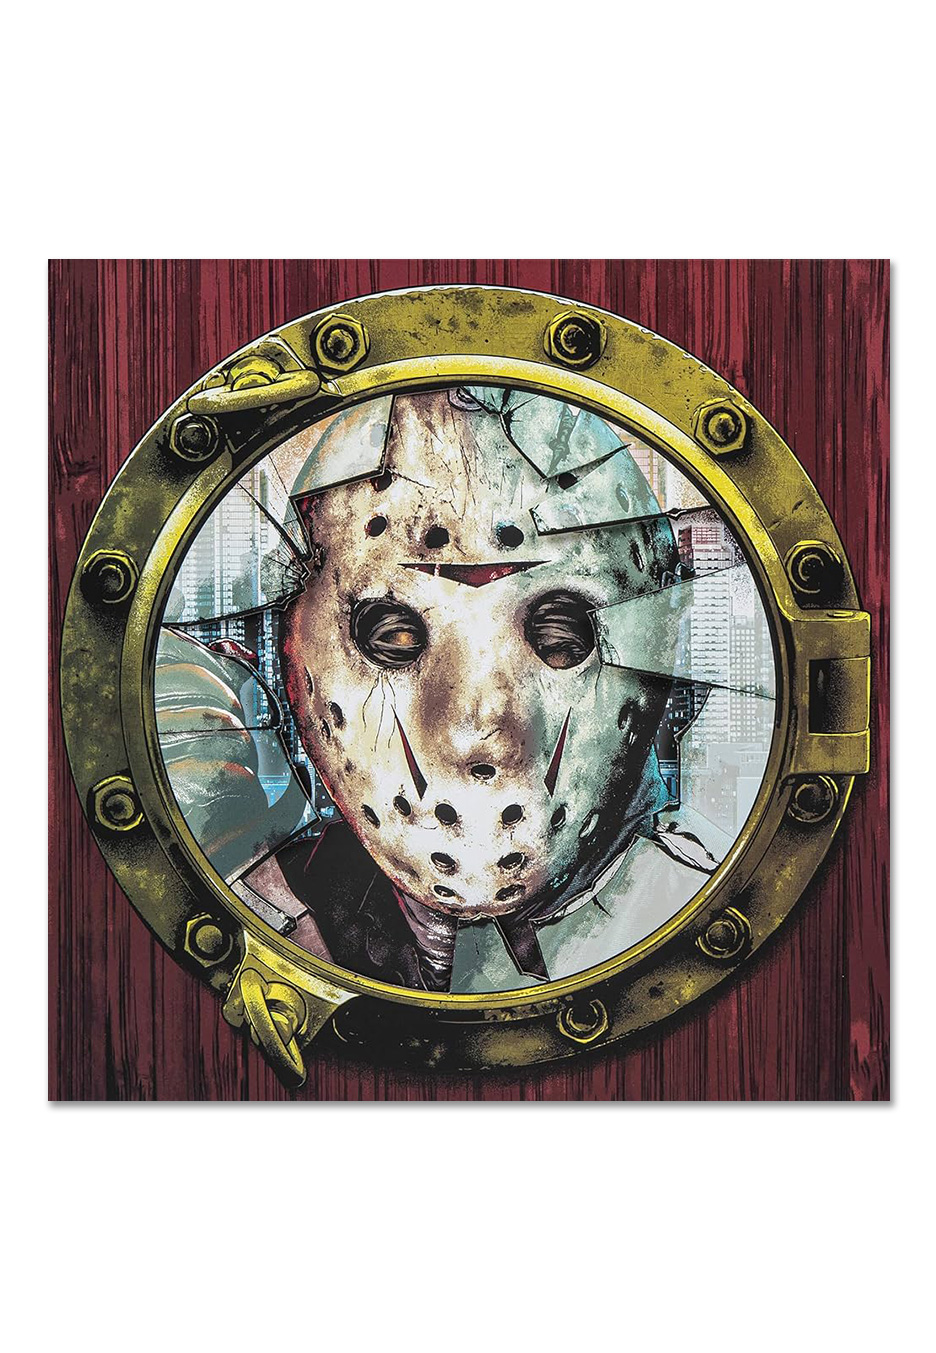 Friday The 13th - Part VIII: Jason Takes Manhatten OST (Fred Mollin) Ltd. Sewer Sludge - Colored 2 Vinyl